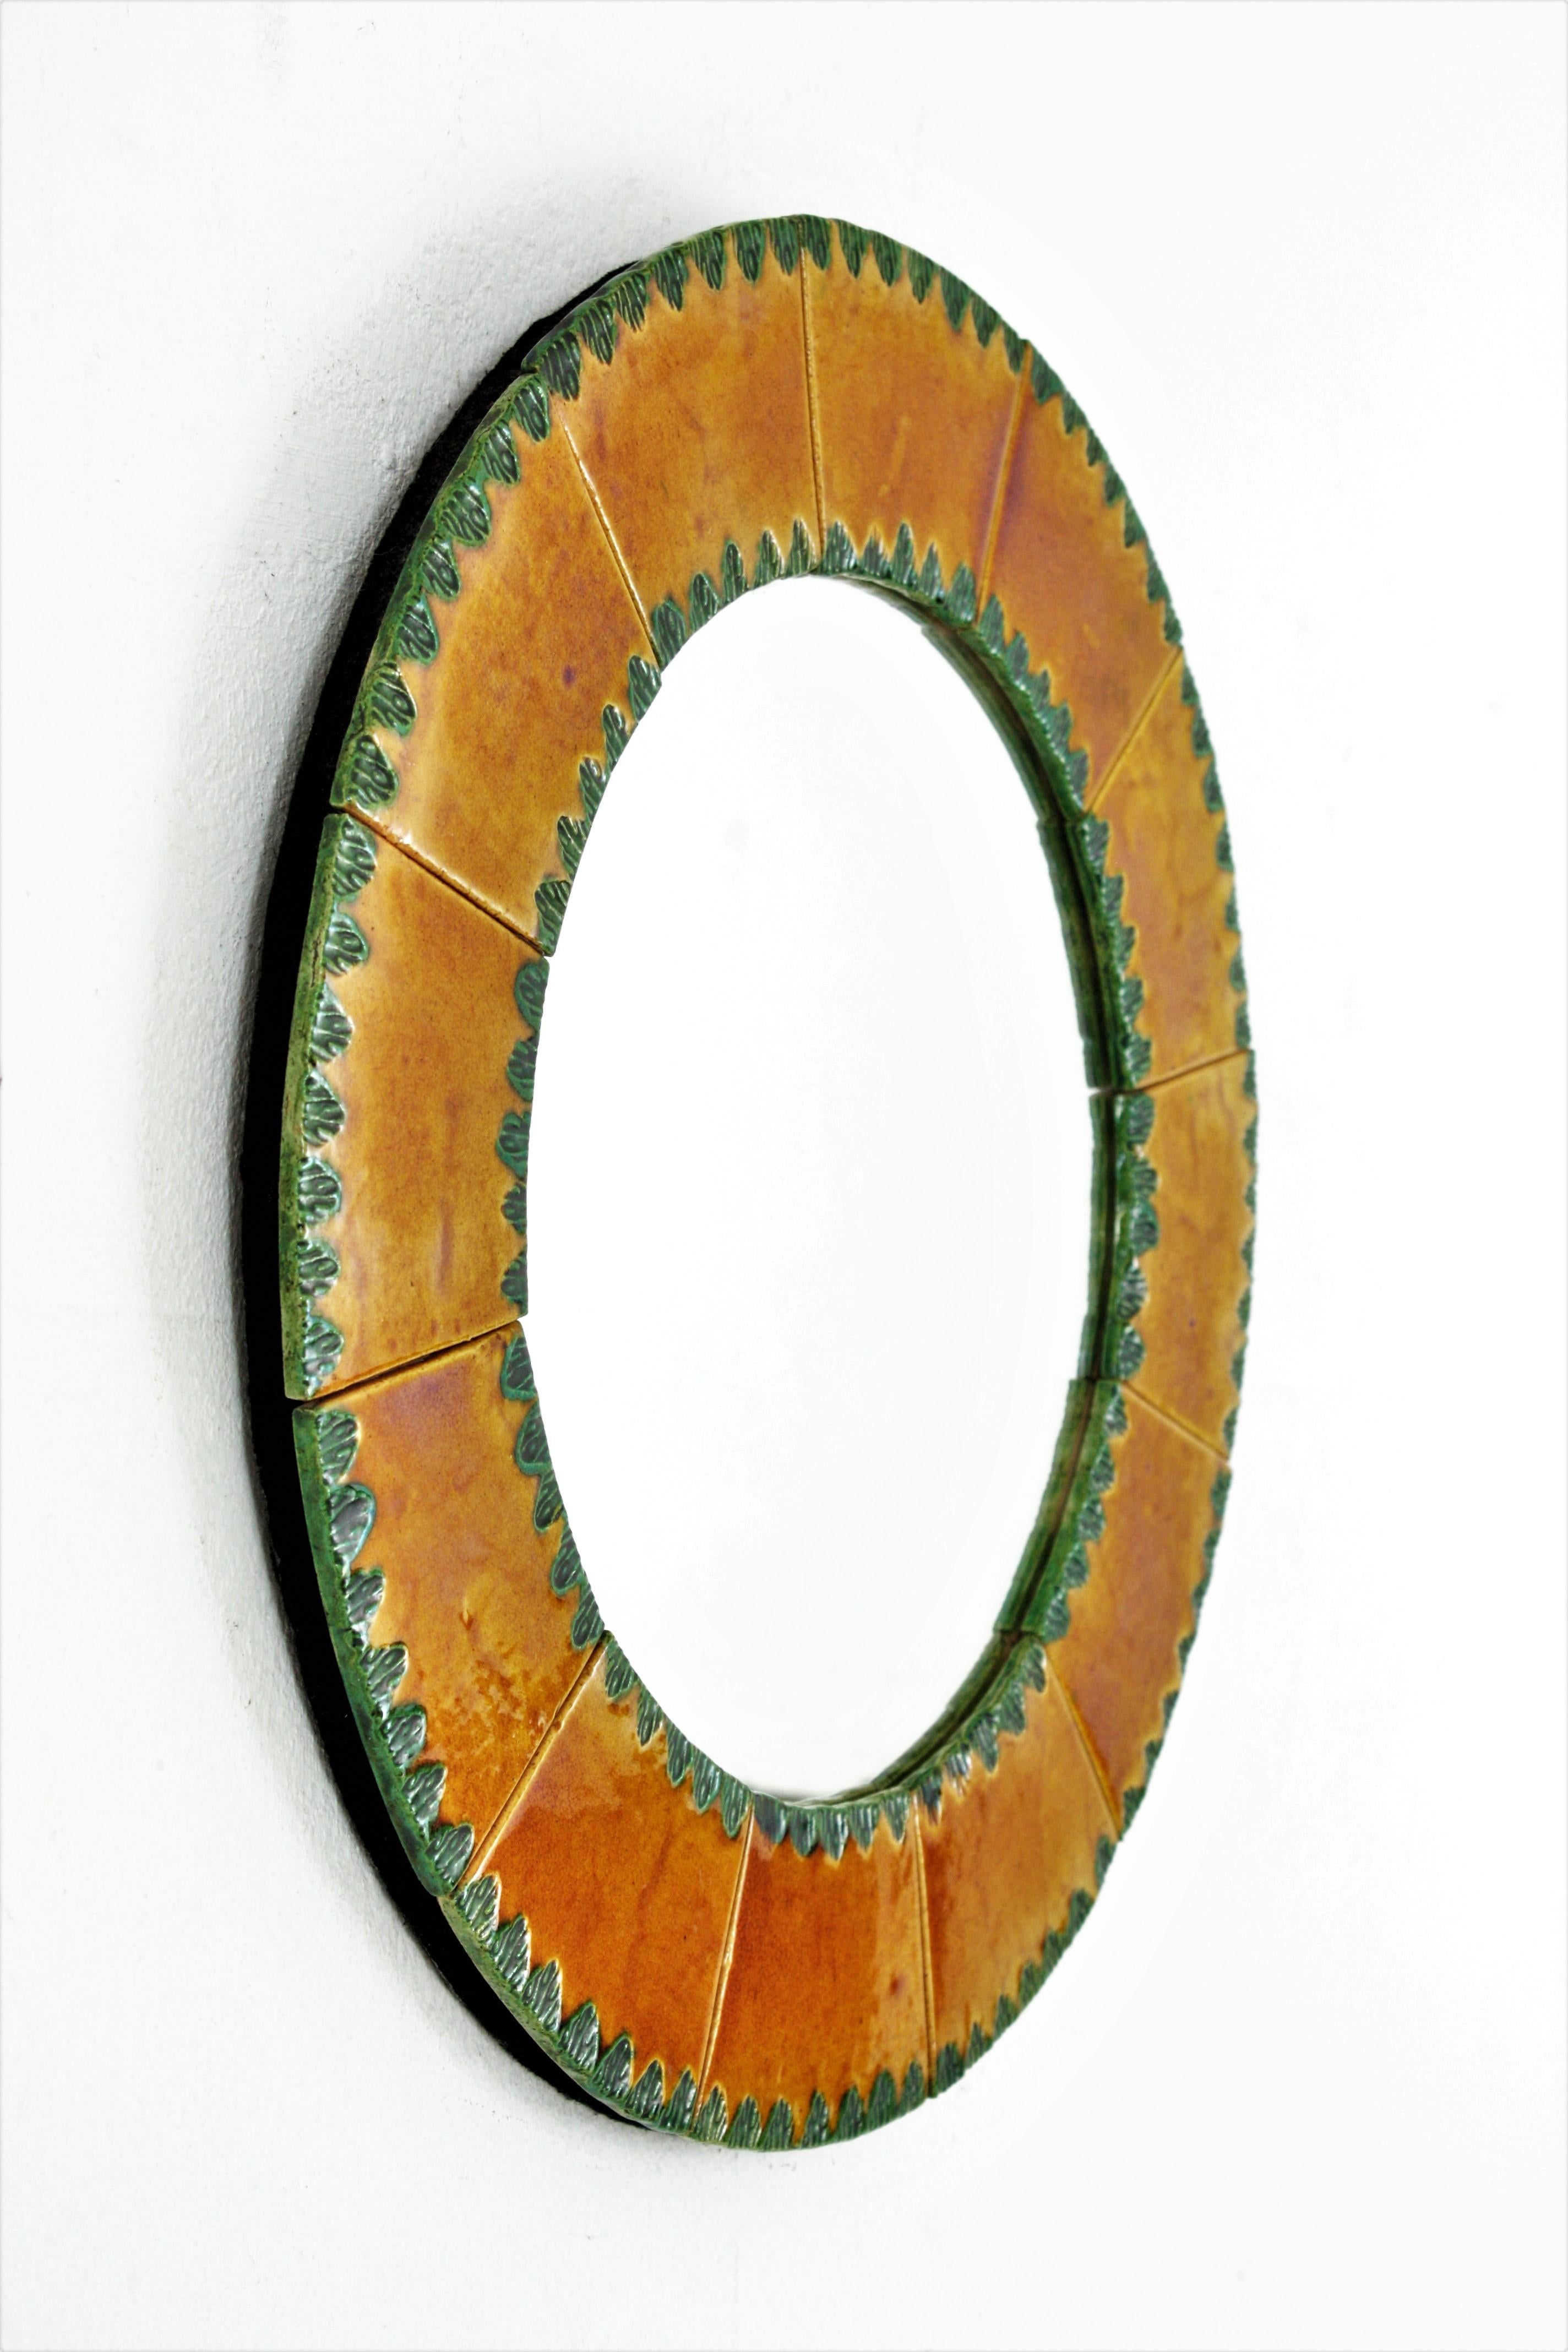 Vallauris François Lembo Style Ceramic Round Mirror in Orange and Green 1